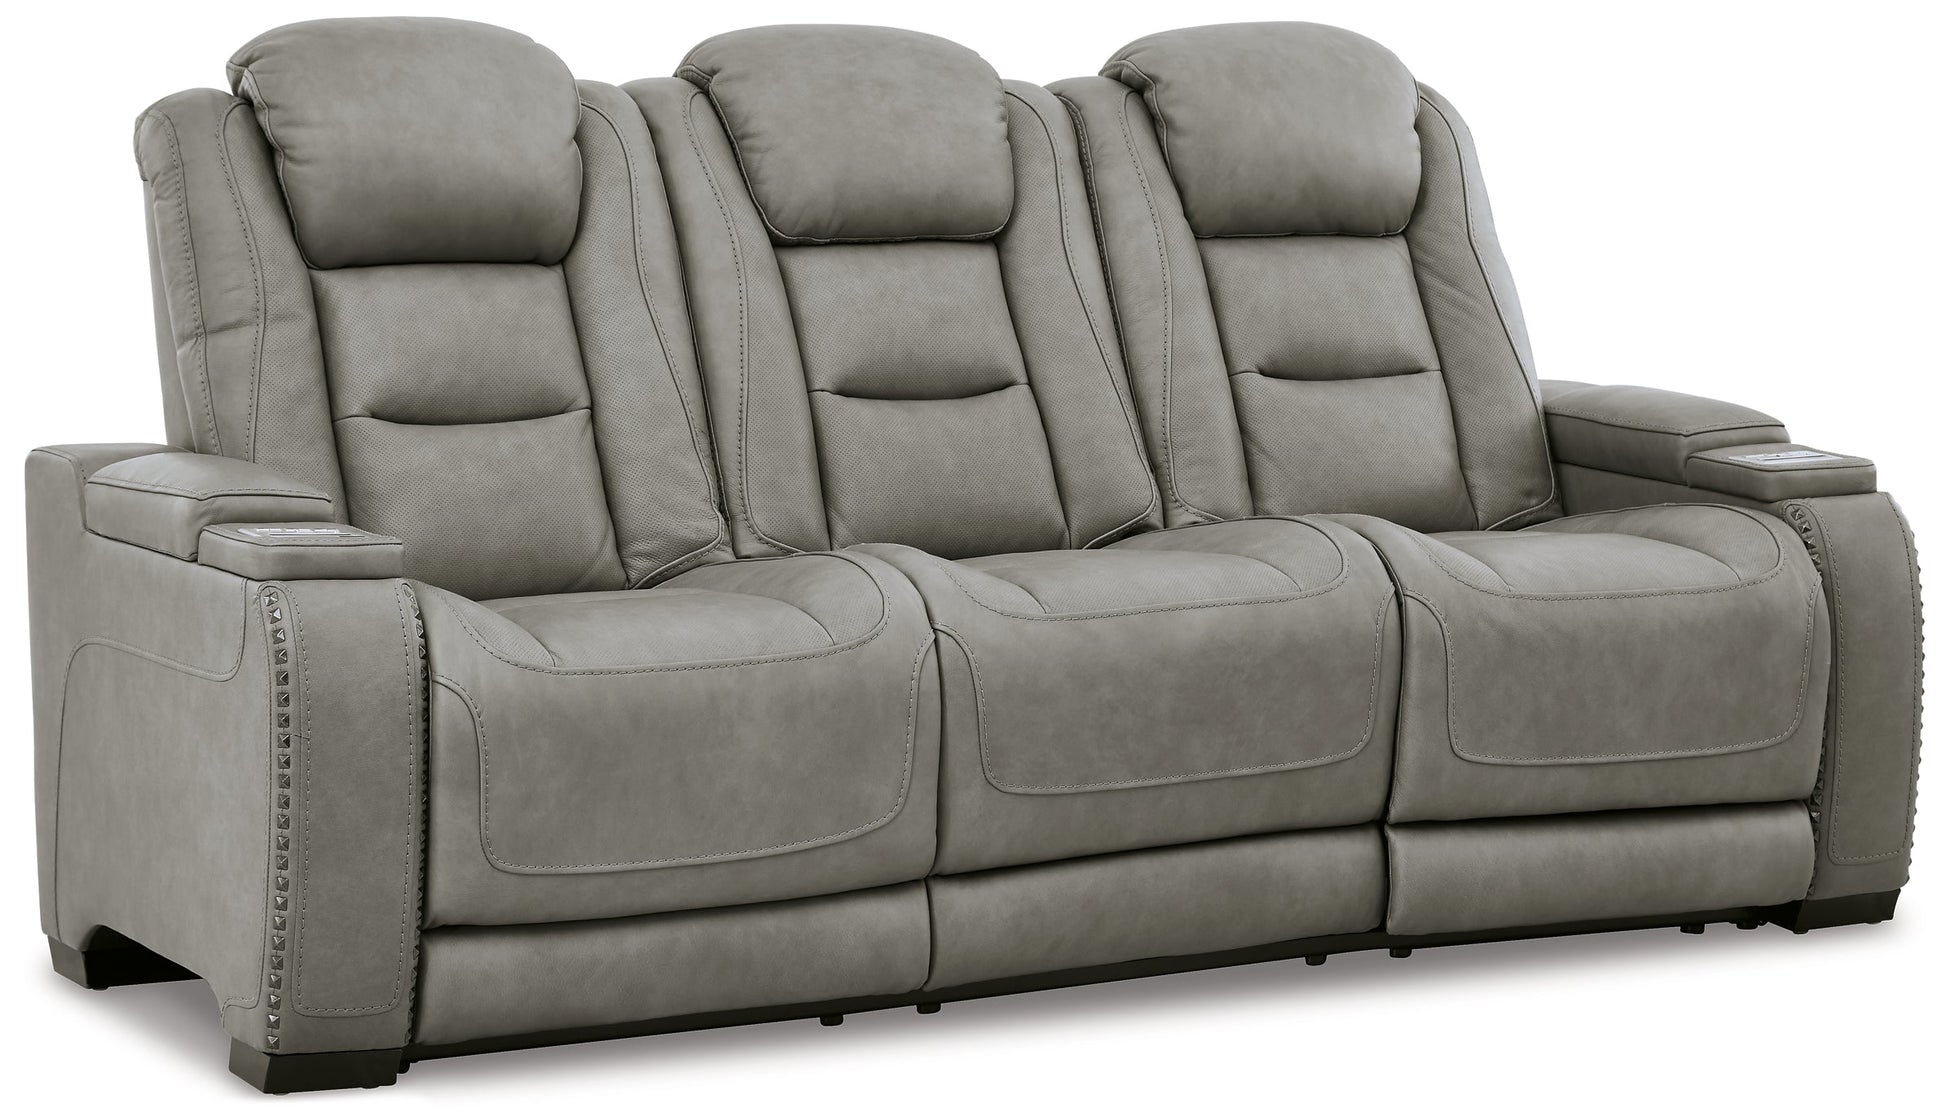 The Man-Den Sofa, Loveseat and Recliner at Walker Mattress and Furniture Locations in Cedar Park and Belton TX.